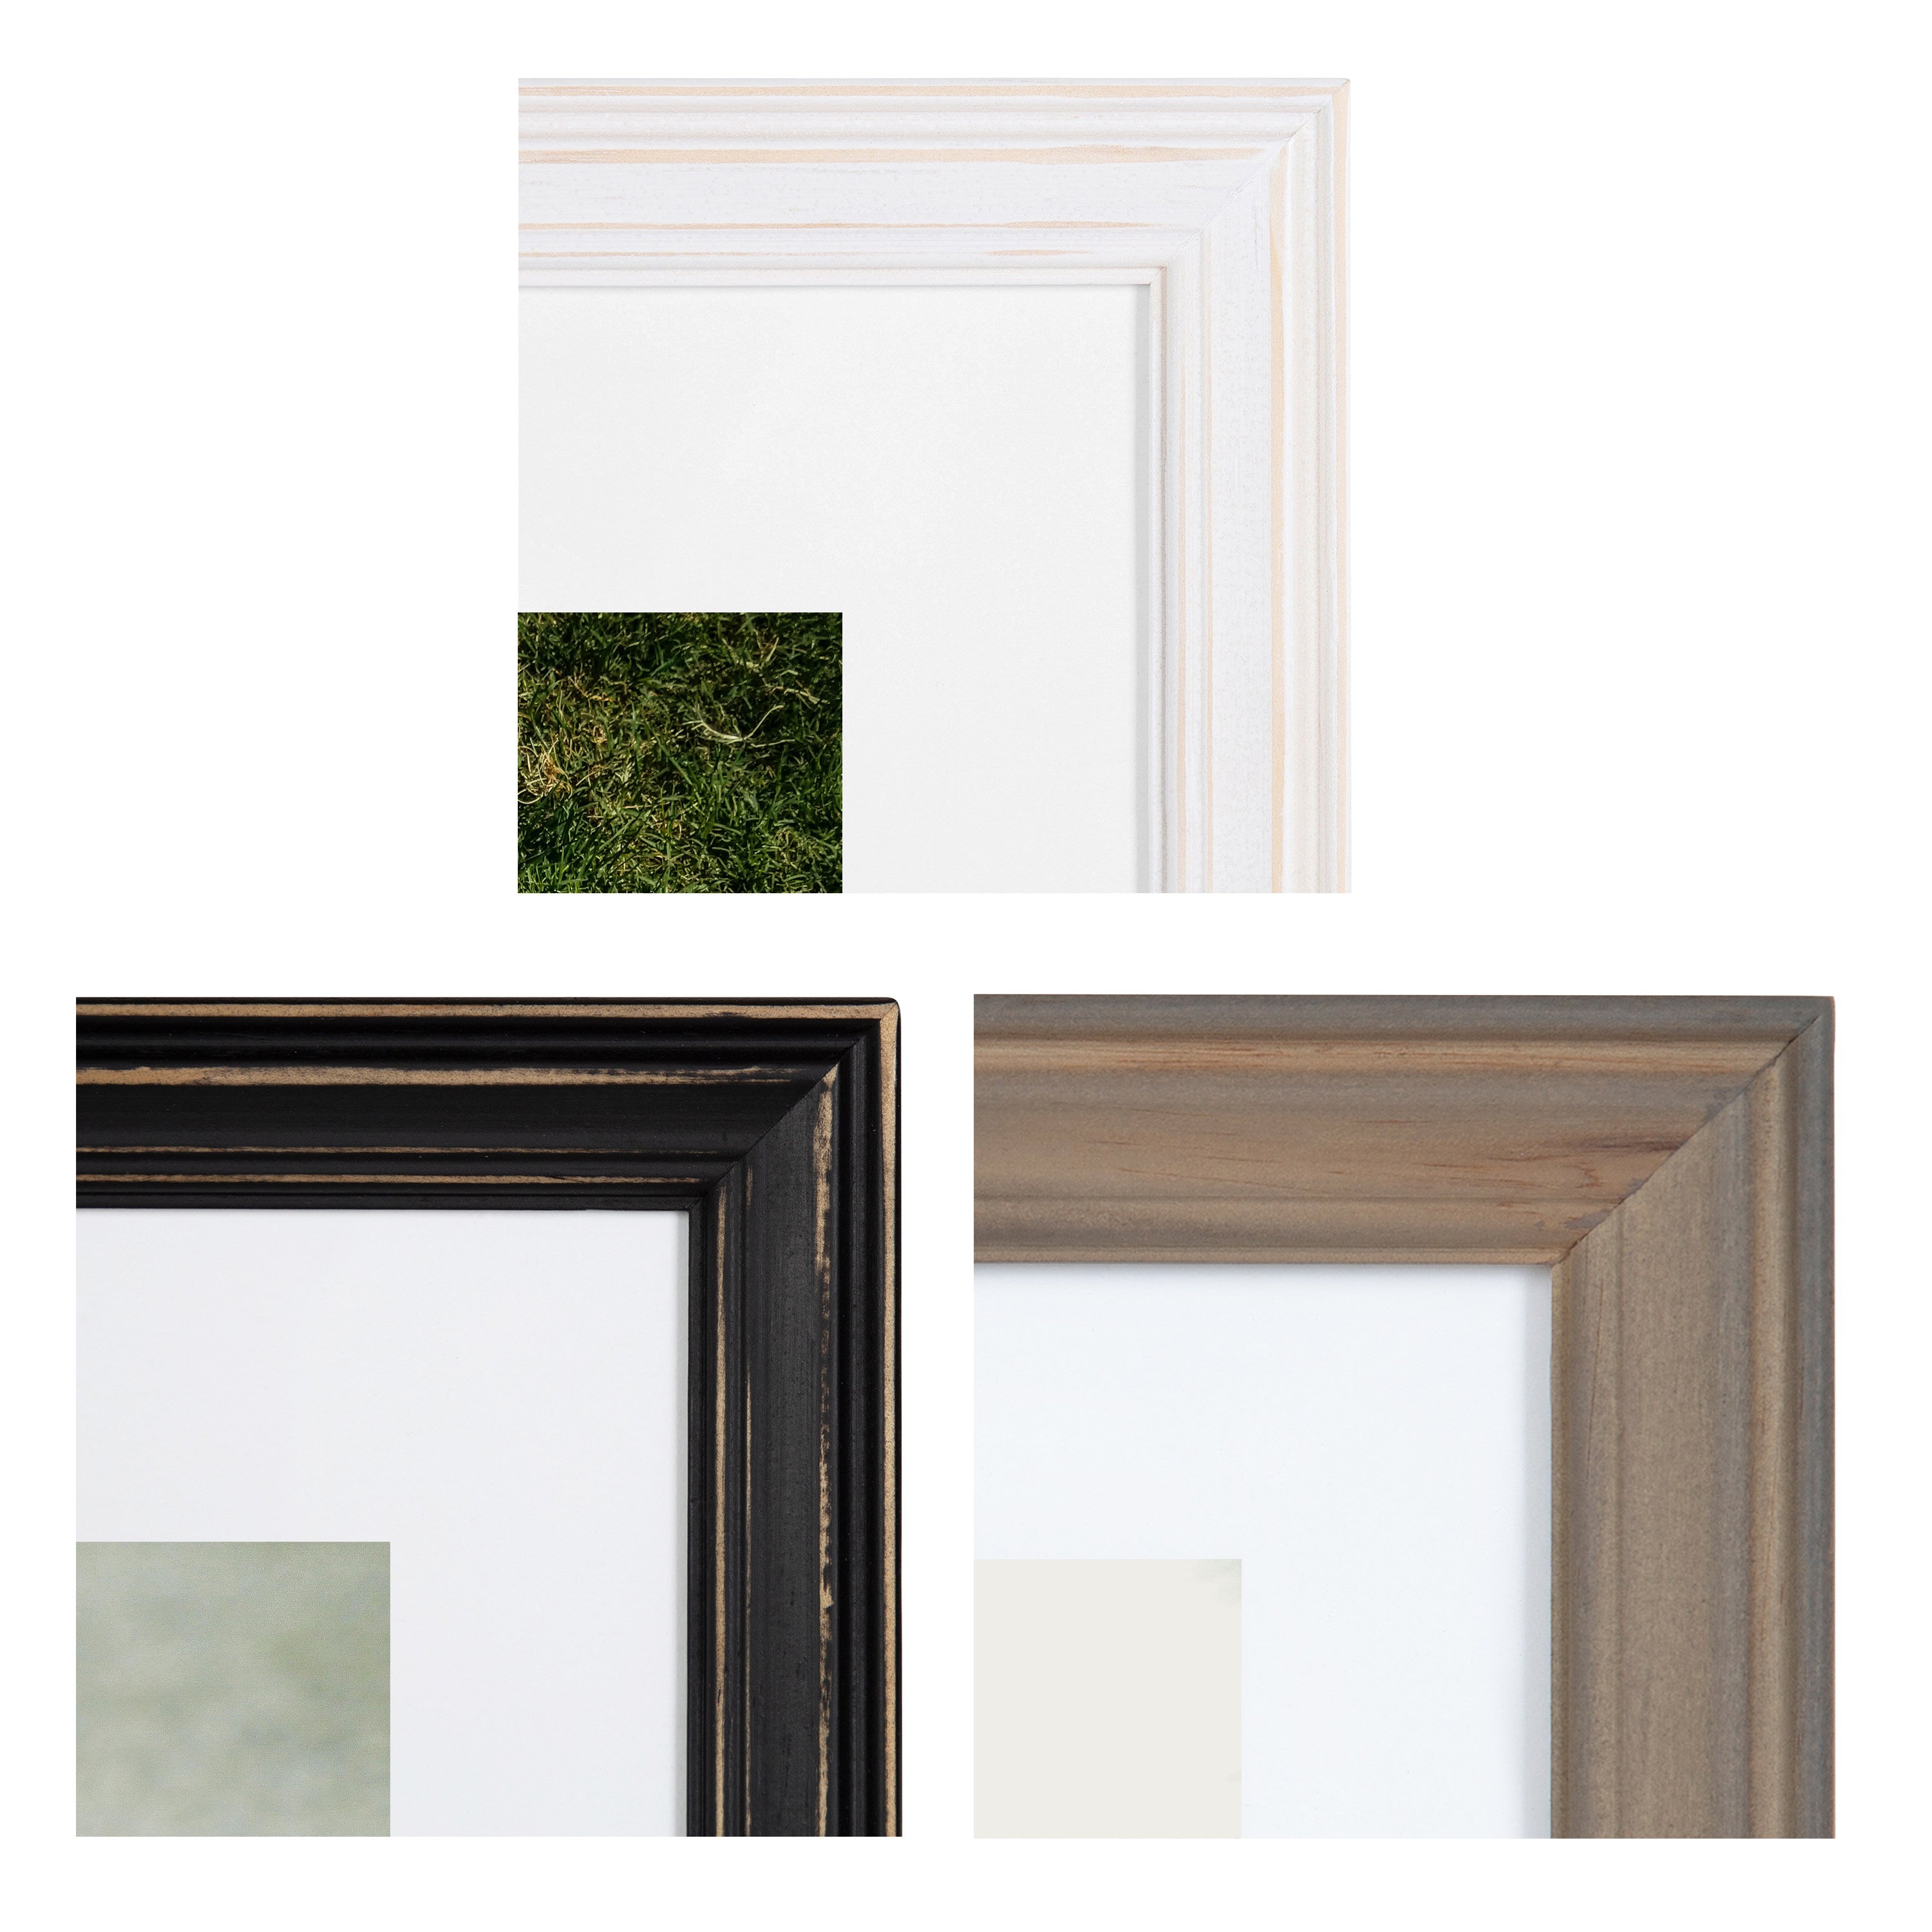 Bordeaux Gallery Wall Frame And Shelf Kit